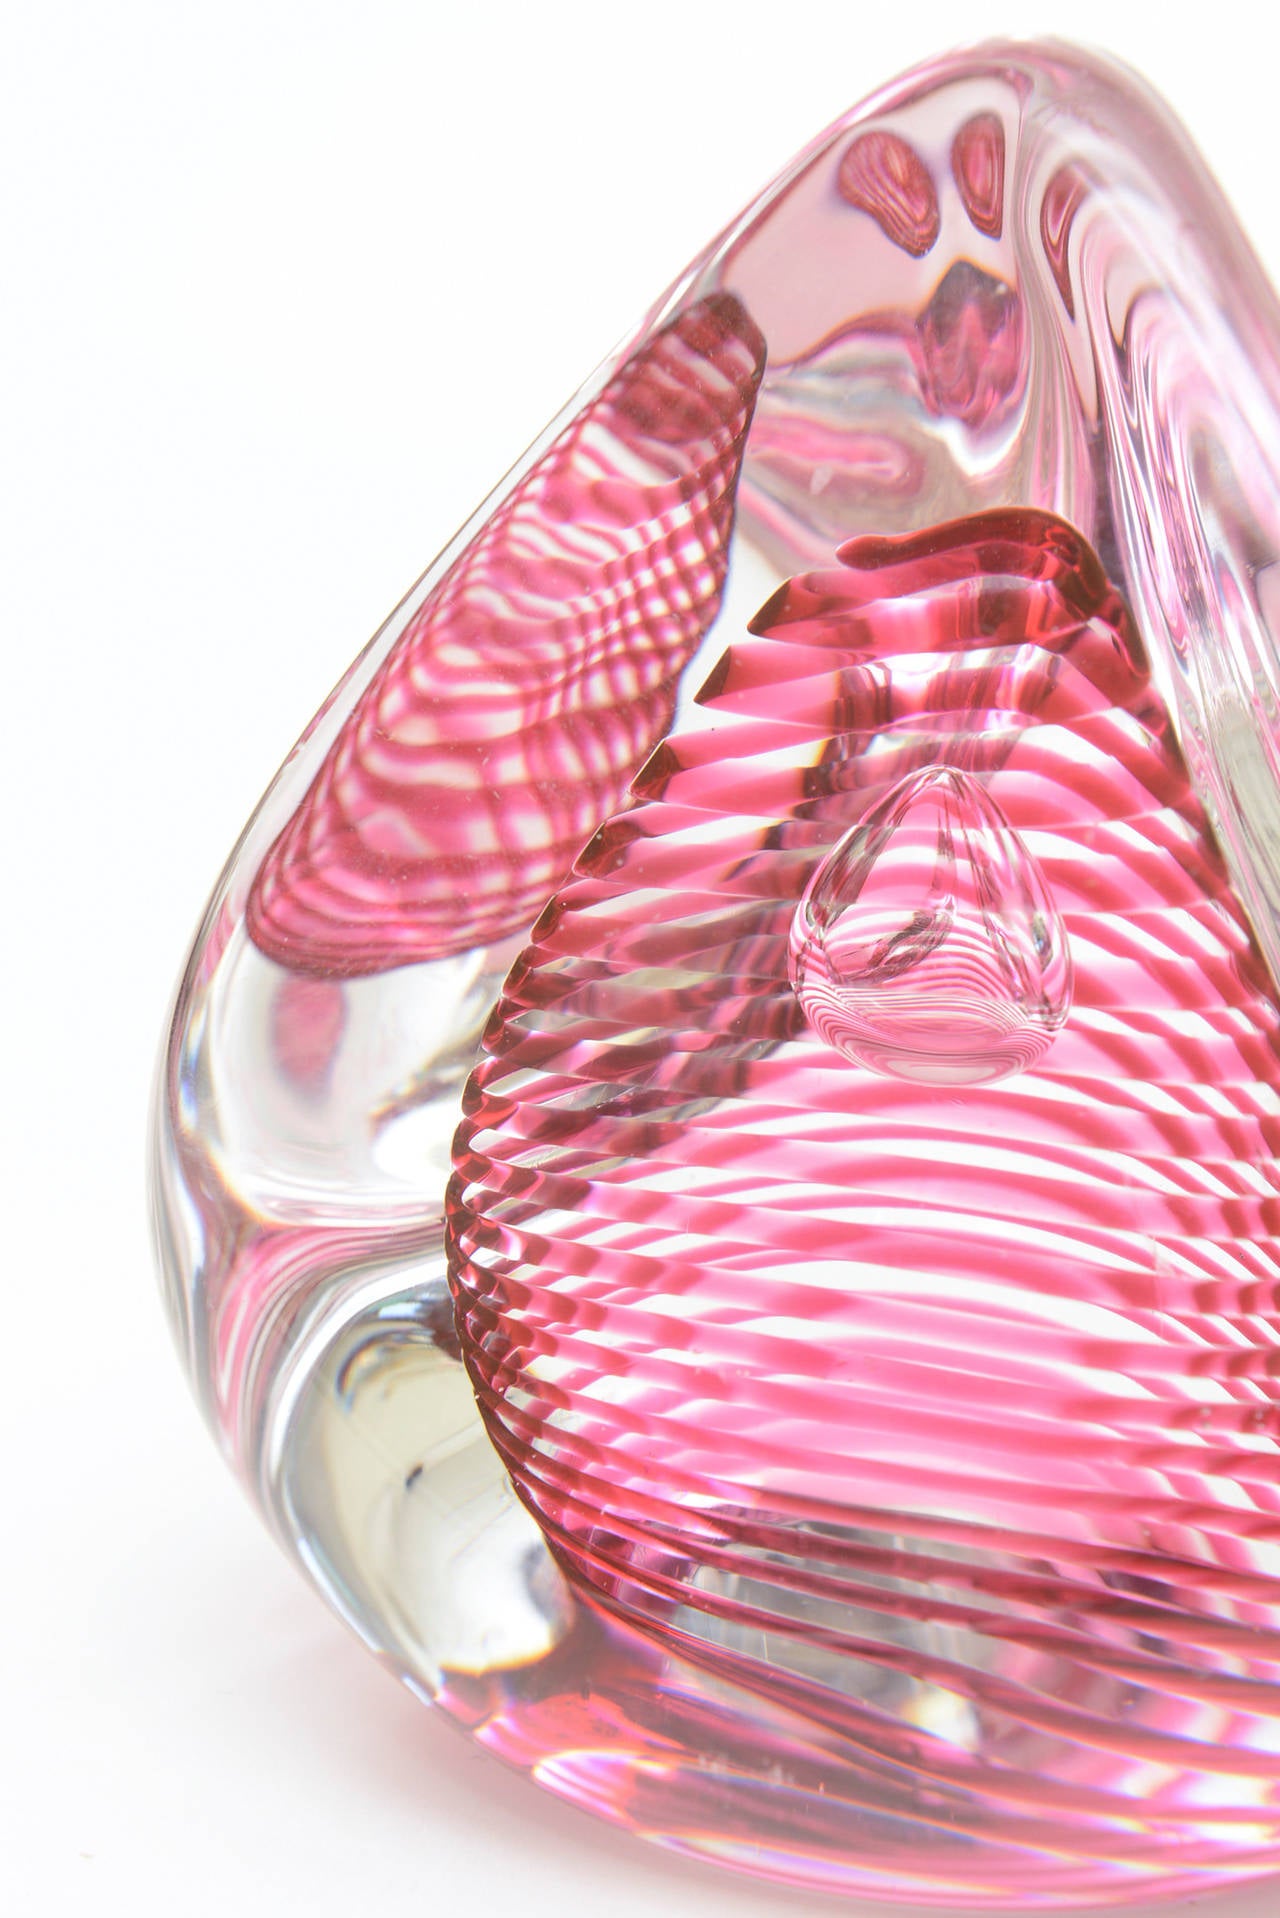 Late 20th Century Optical Swedish Glass Paperweight or Object Signed Desk Accessory